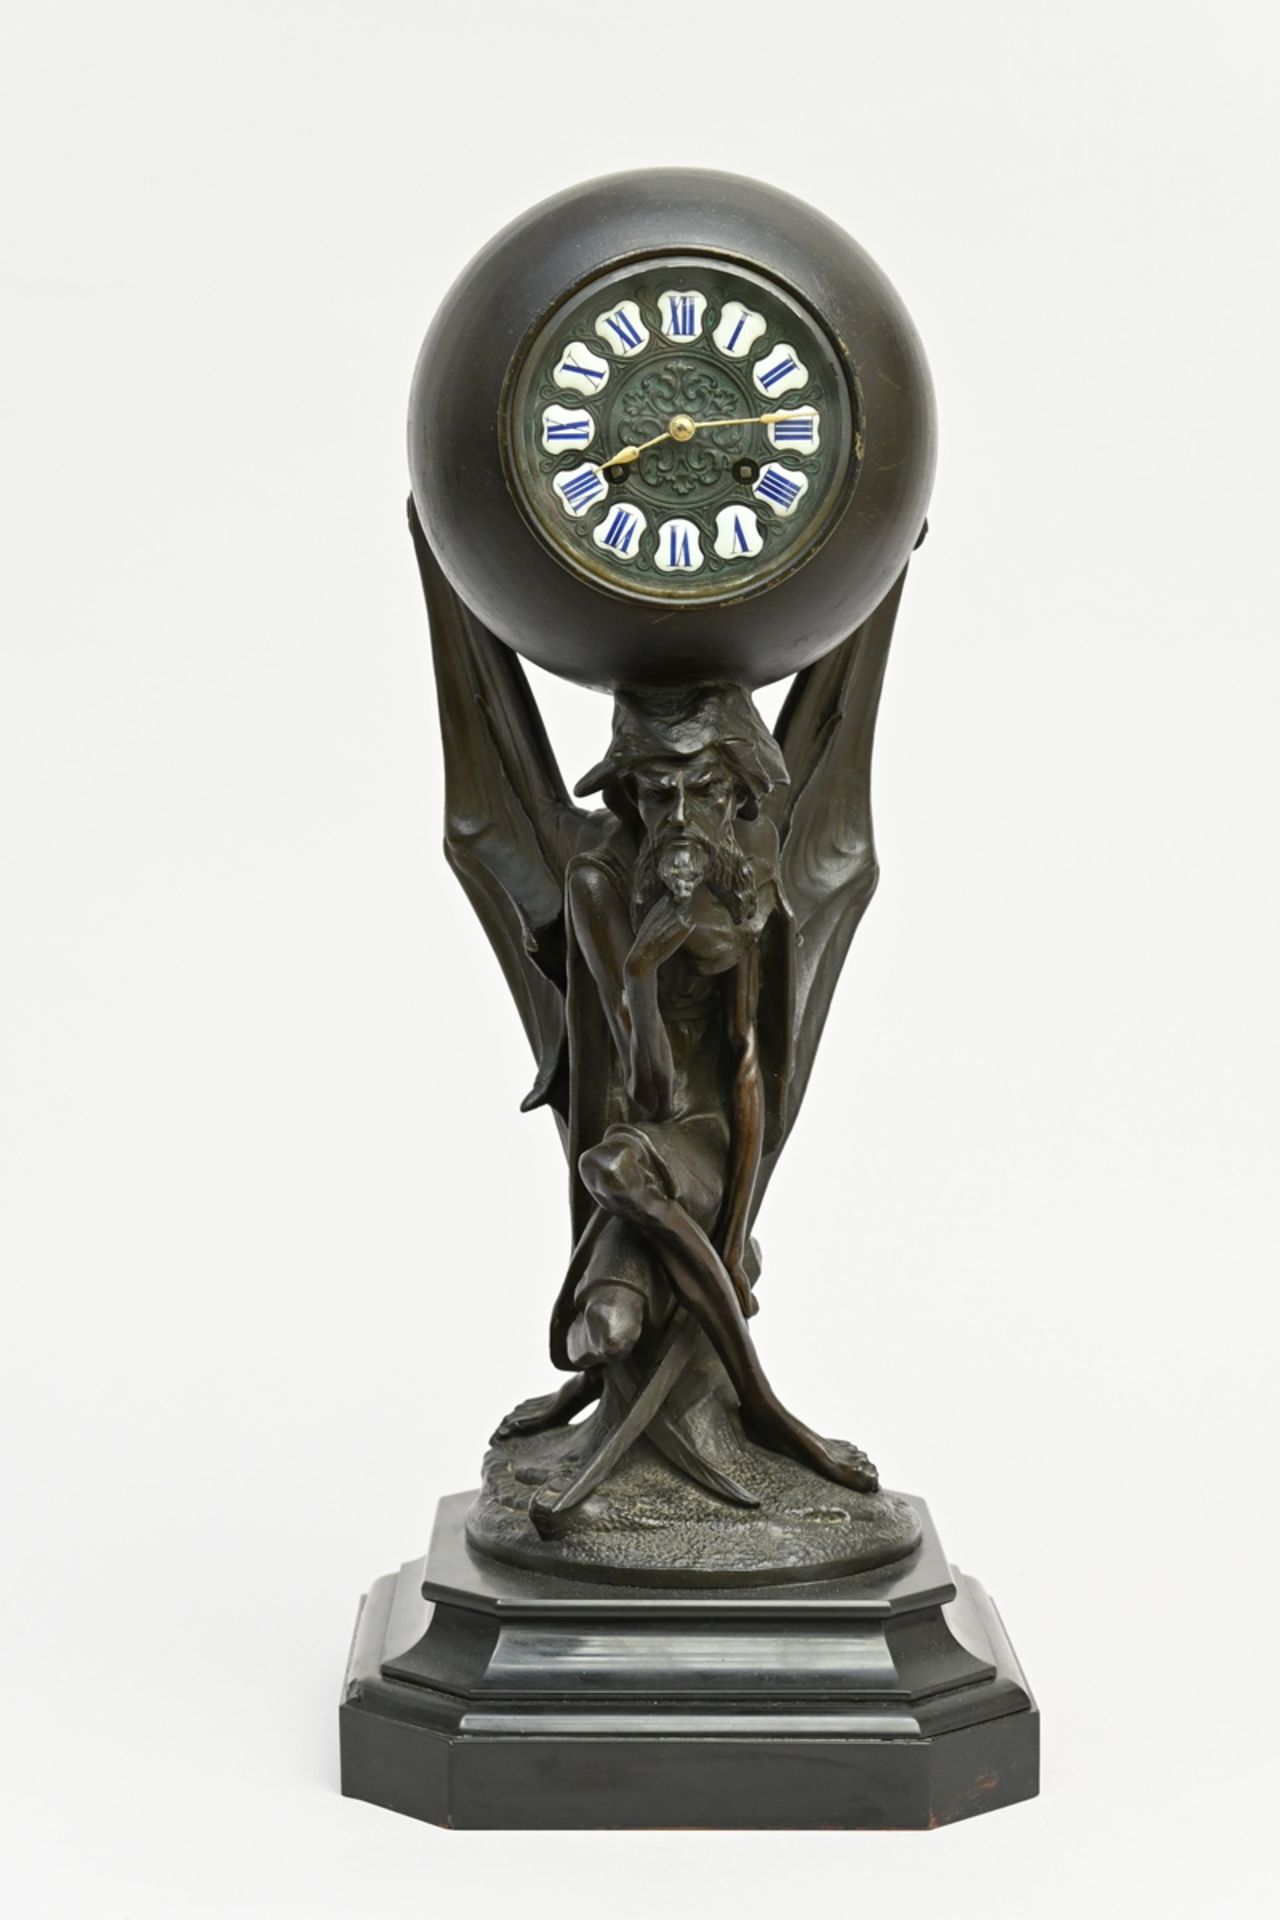 Clock in zamack 'devil' by Lemaire, 19th century (h56cm) (*)